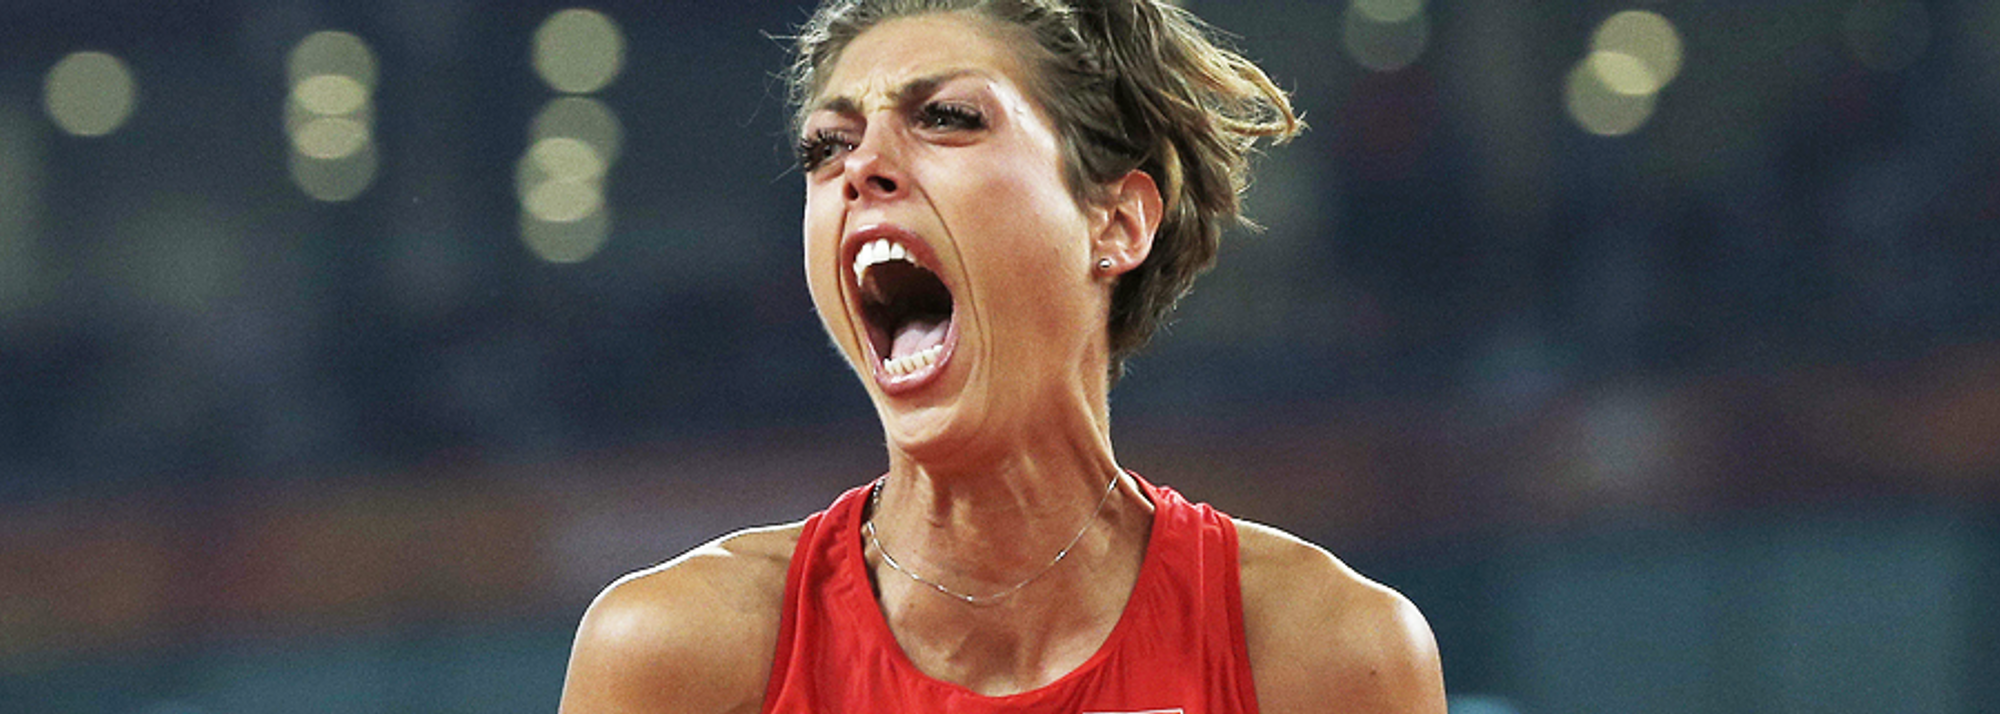 Despite all her success, and her undoubted talent, when Blanka Vlasic walked into the Bird’s Nest Stadium for the women’s high jump final, she couldn’t possibly foresee what was about to happen. 